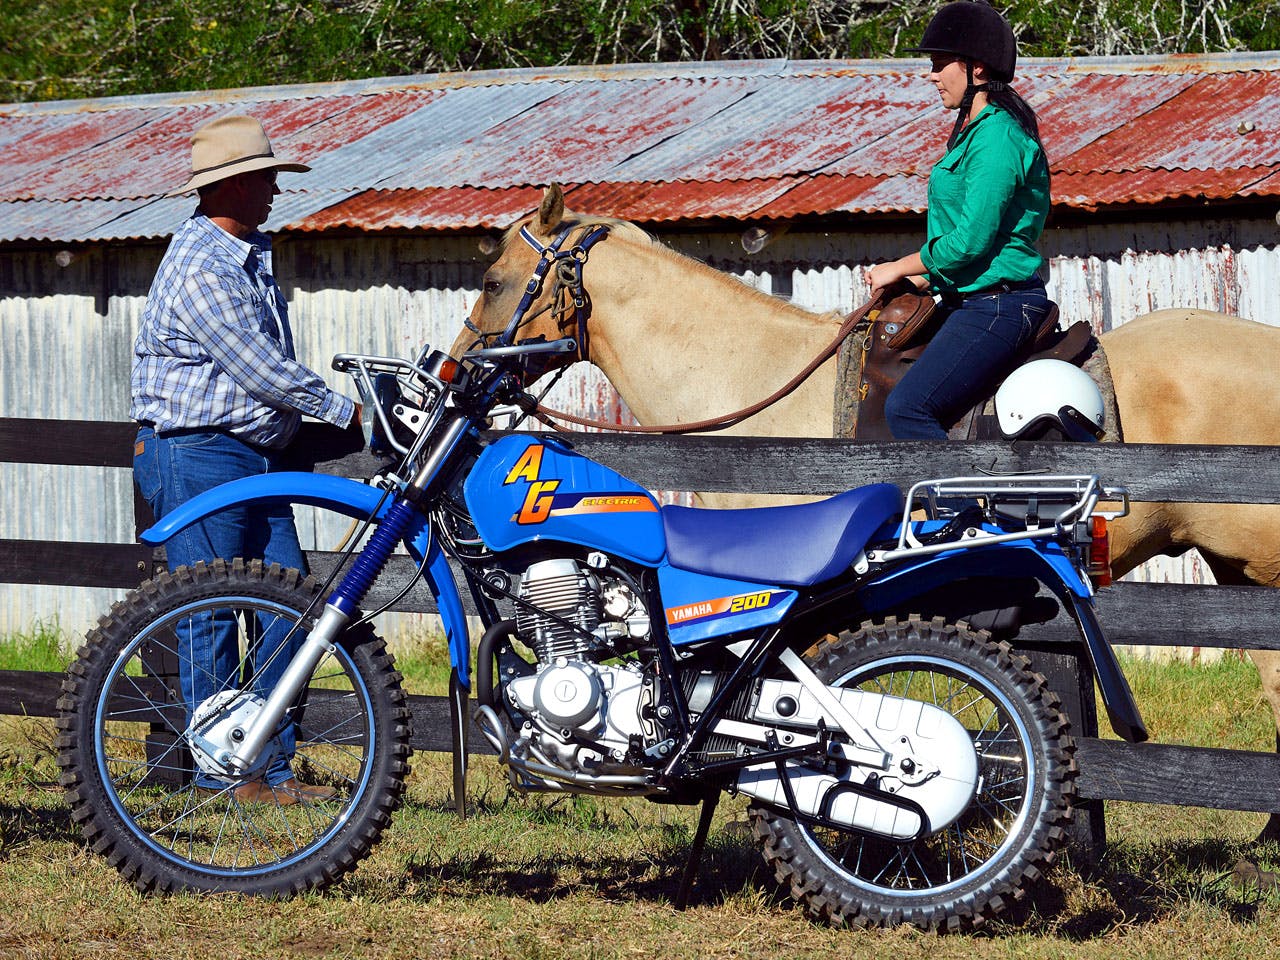 Yamaha AG200F parked in front of a horse on a farm